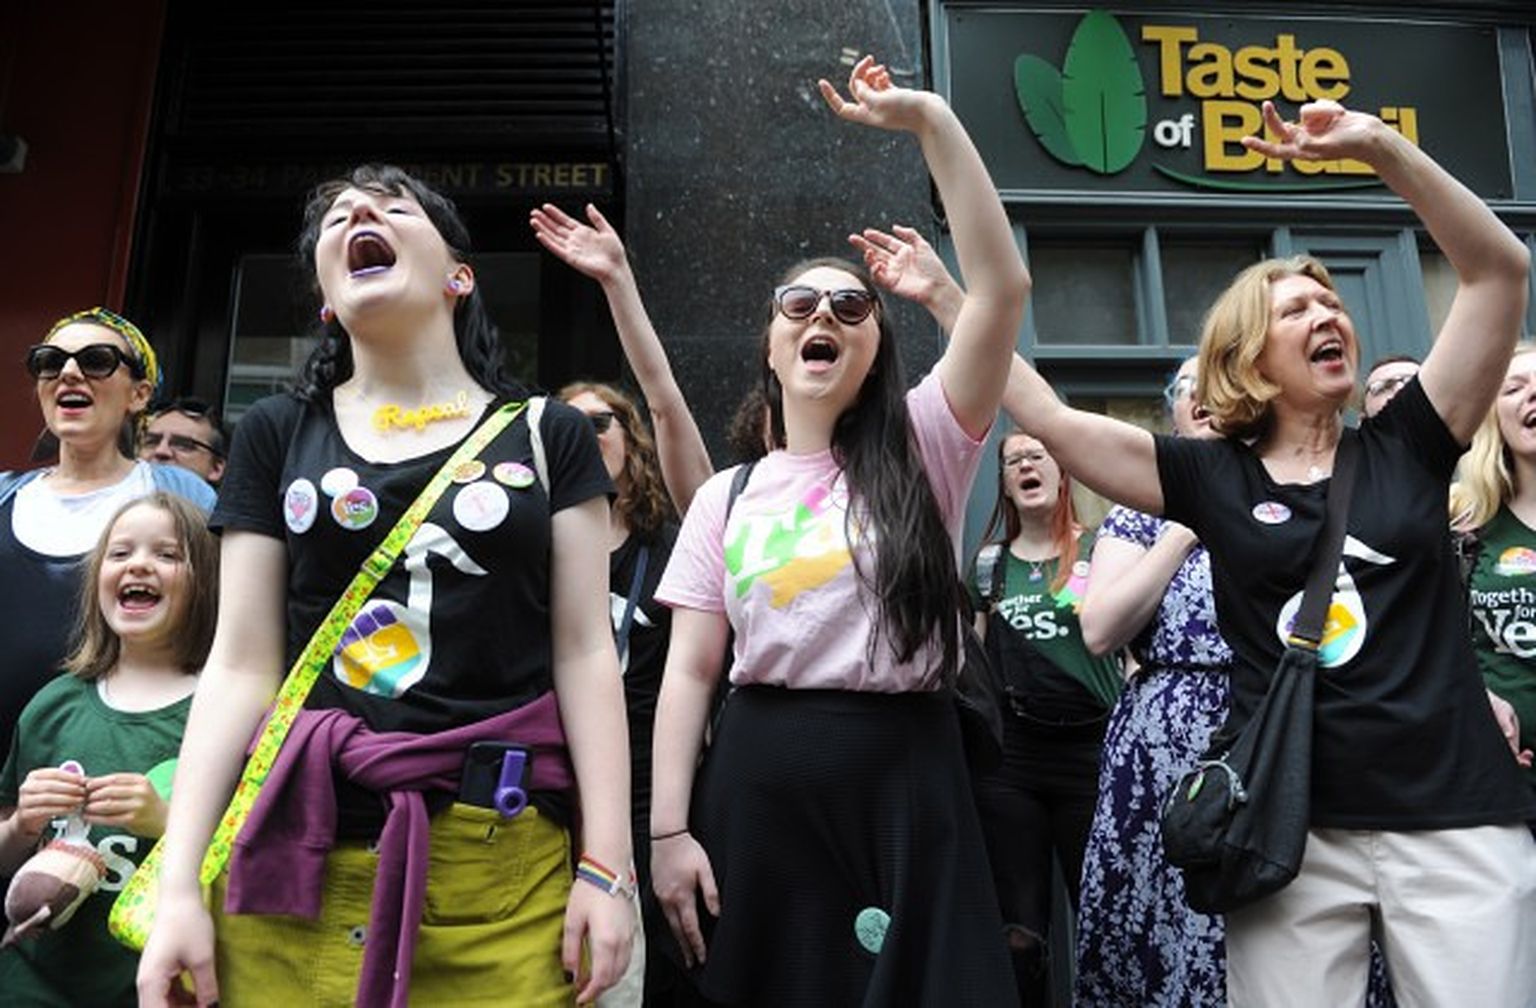 Members of a women's Choir for Choice sing after a referndum on abortion, in Dublin, Ireland, 26 May 2018. Ireland has voted overwhelmingly to legalize abortion in a historic referendum on 25 May 2018.  EPA/AIDAN CRAWLEY